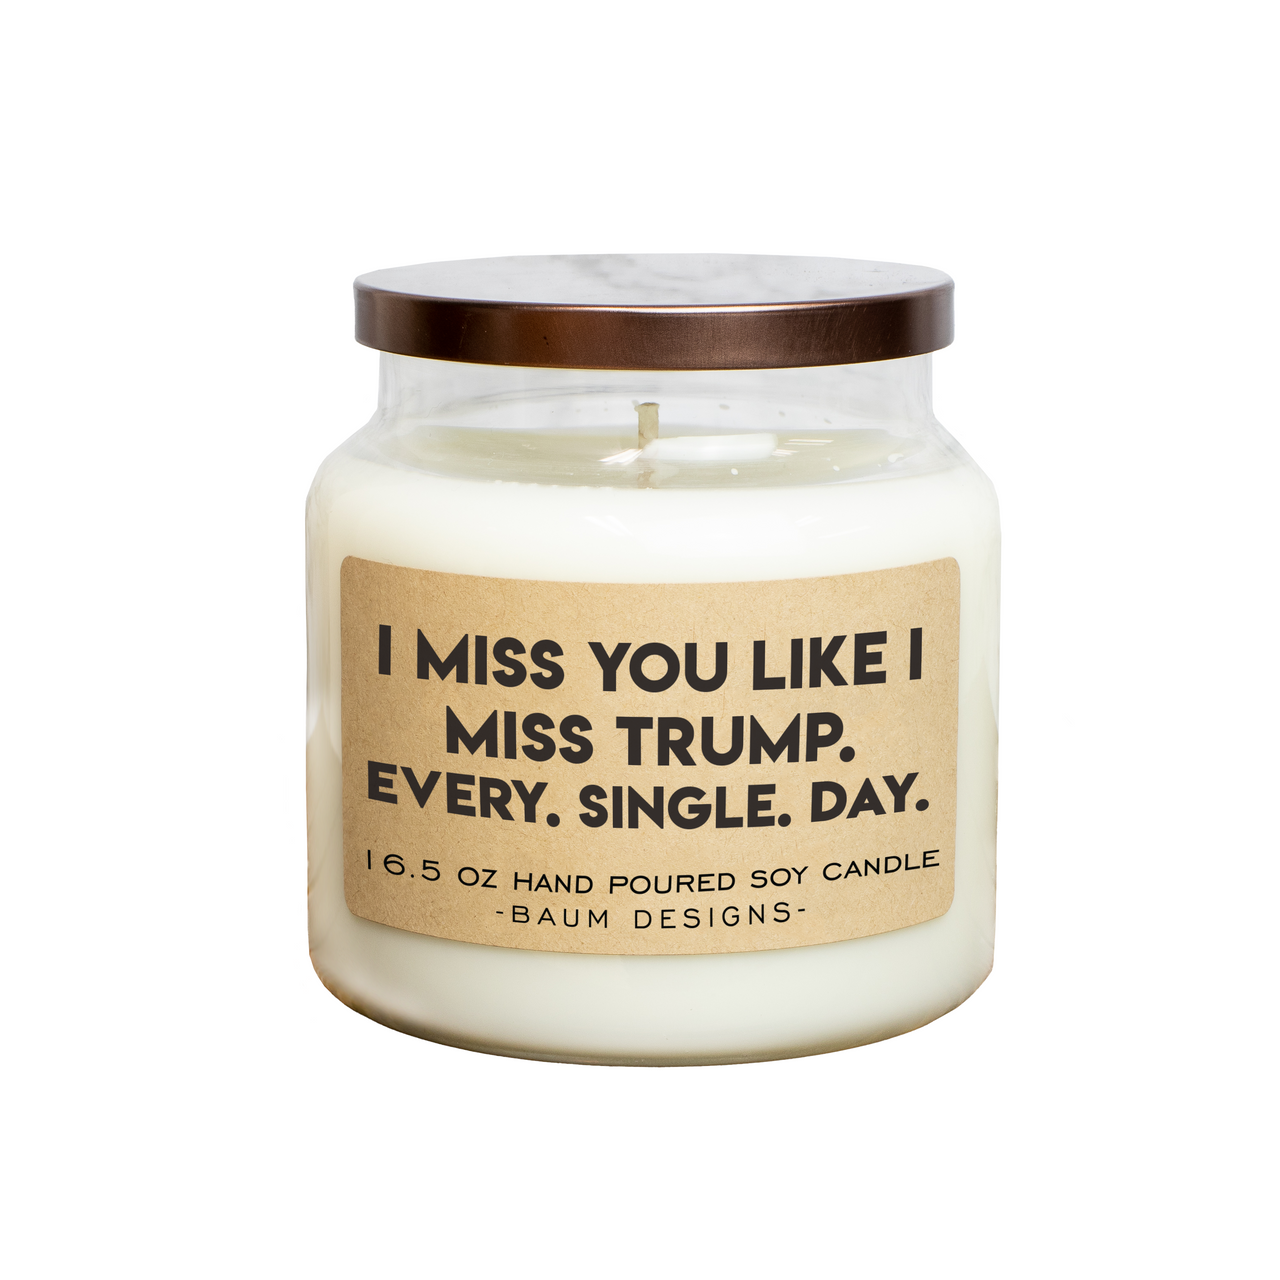 I Miss You Like I Miss Trump Every Single Day Soy Candle Baum Designs